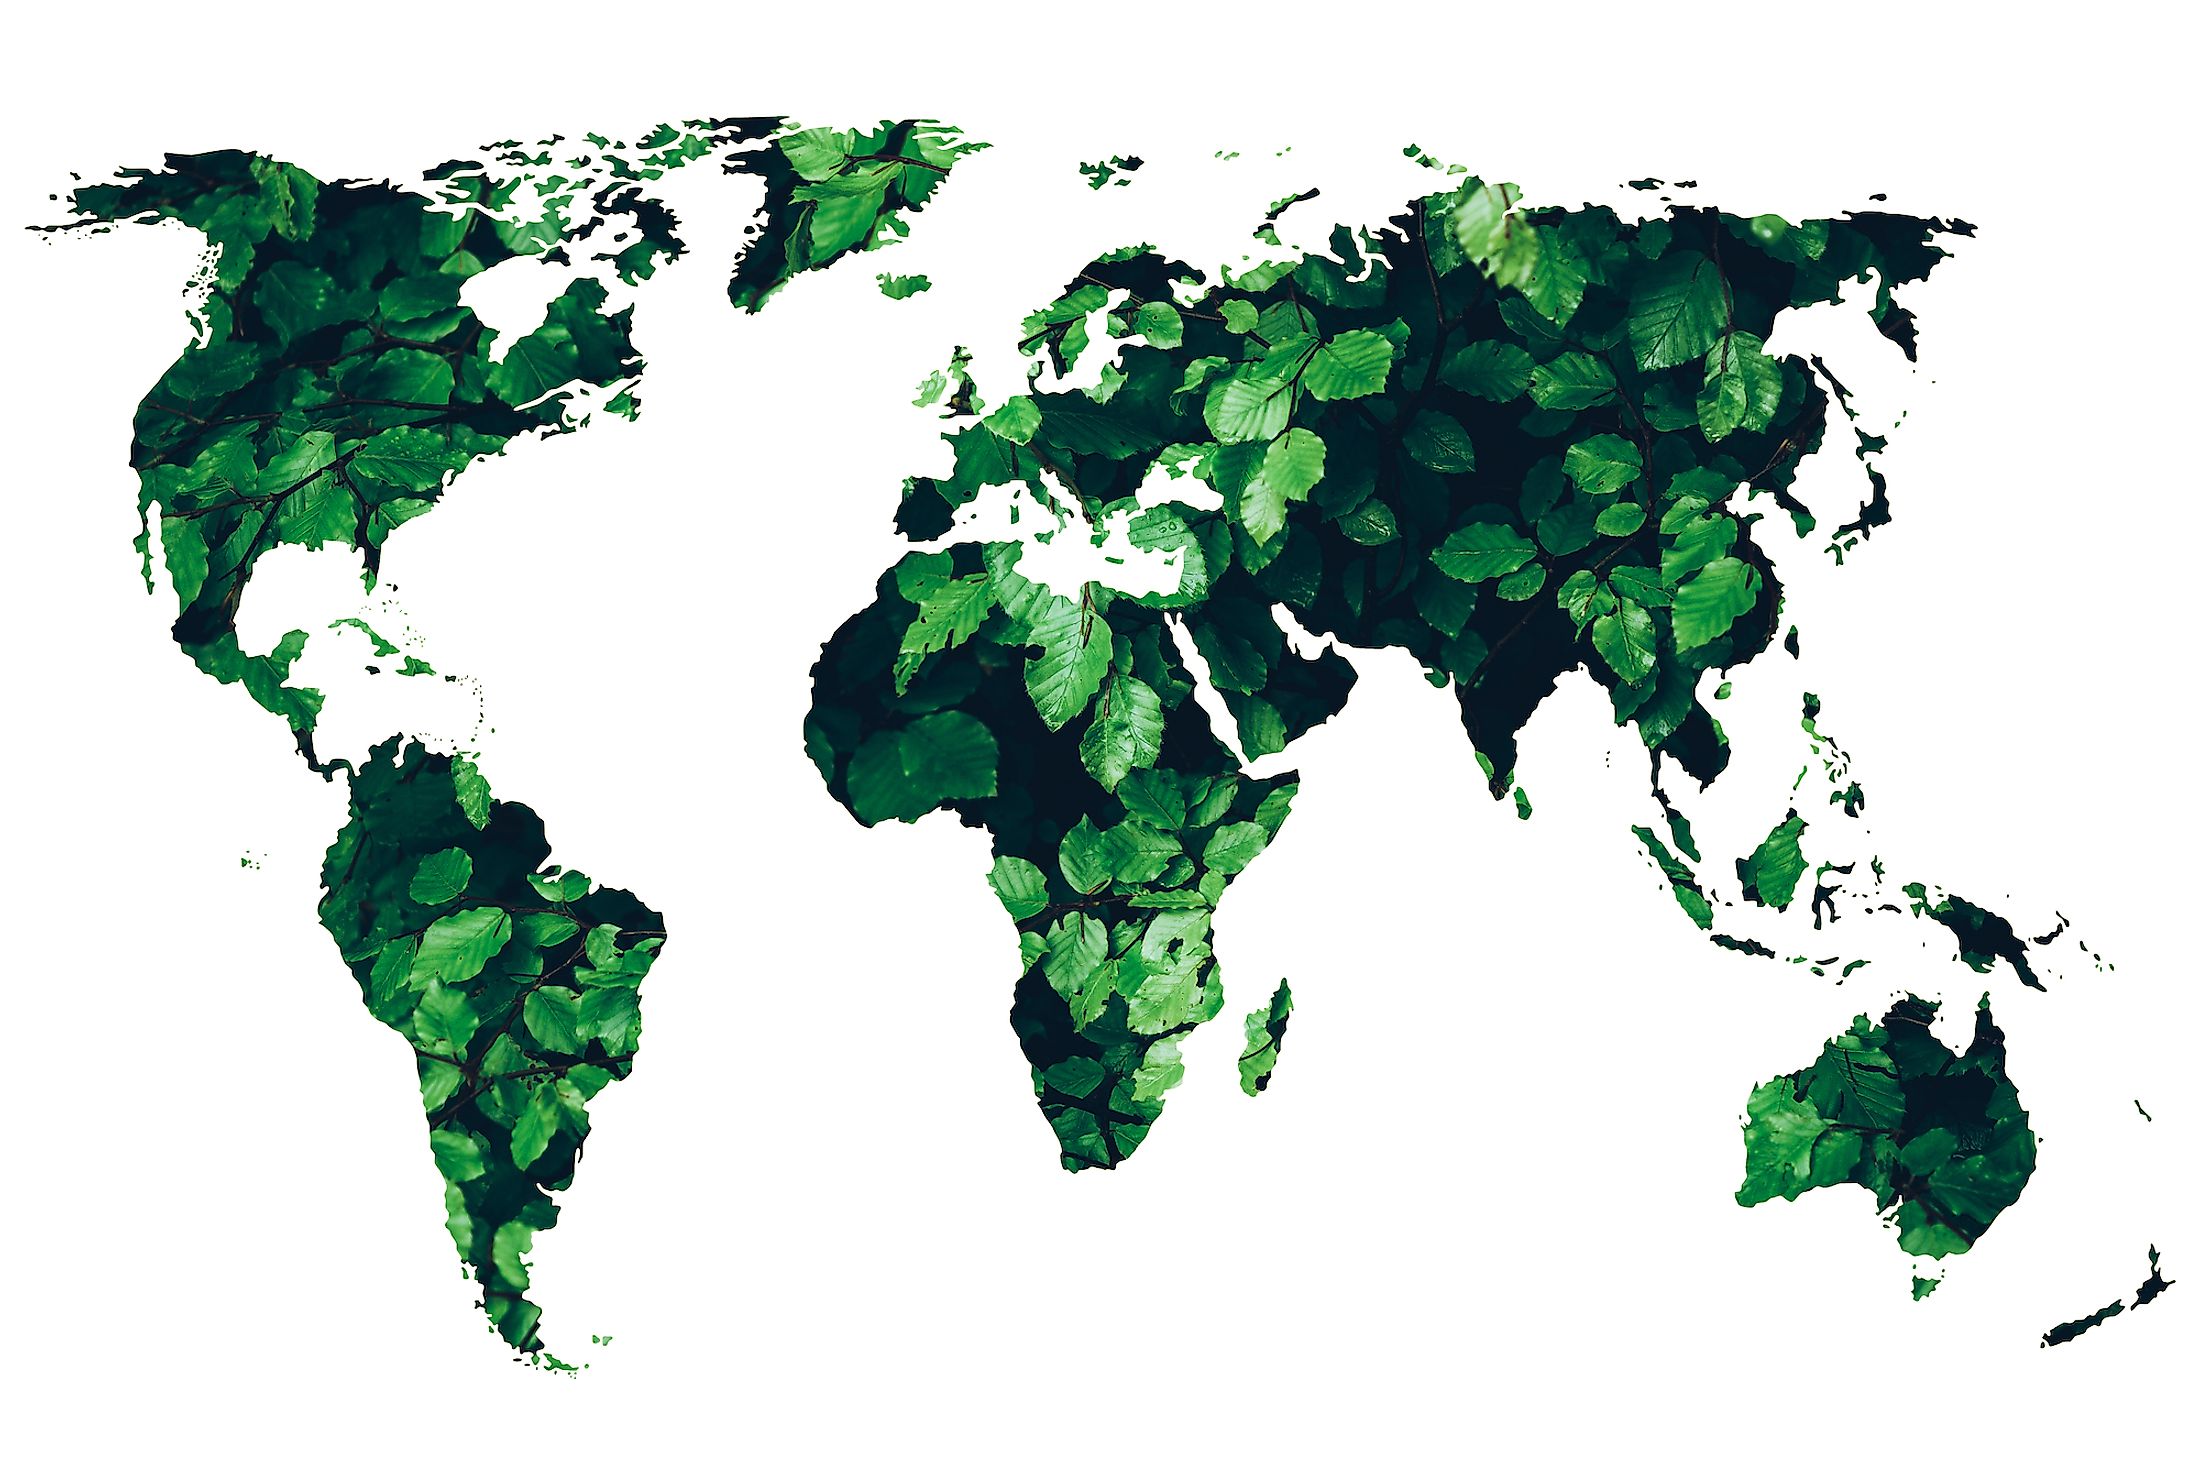 Green countries 